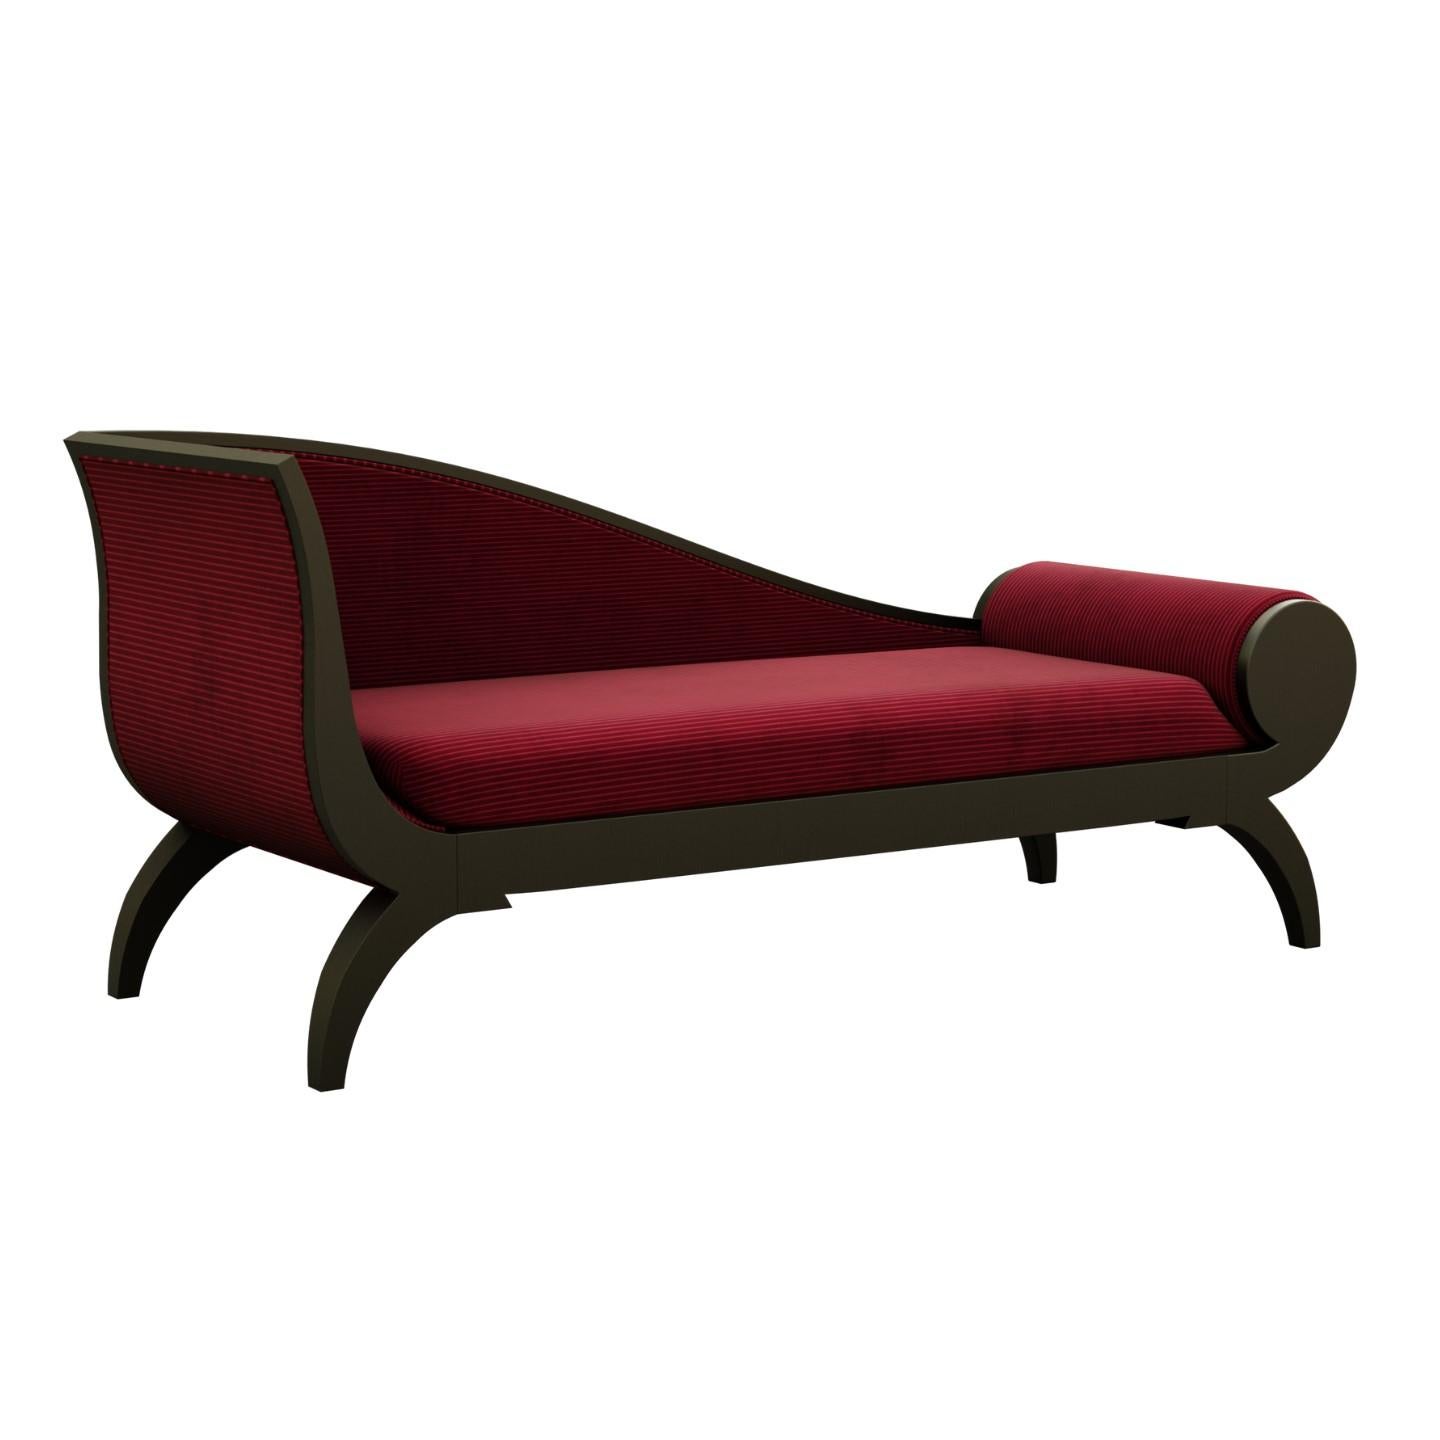 Chaise longue made of shaped cherry wood, upholstered seat
and back in leather or fabric.
